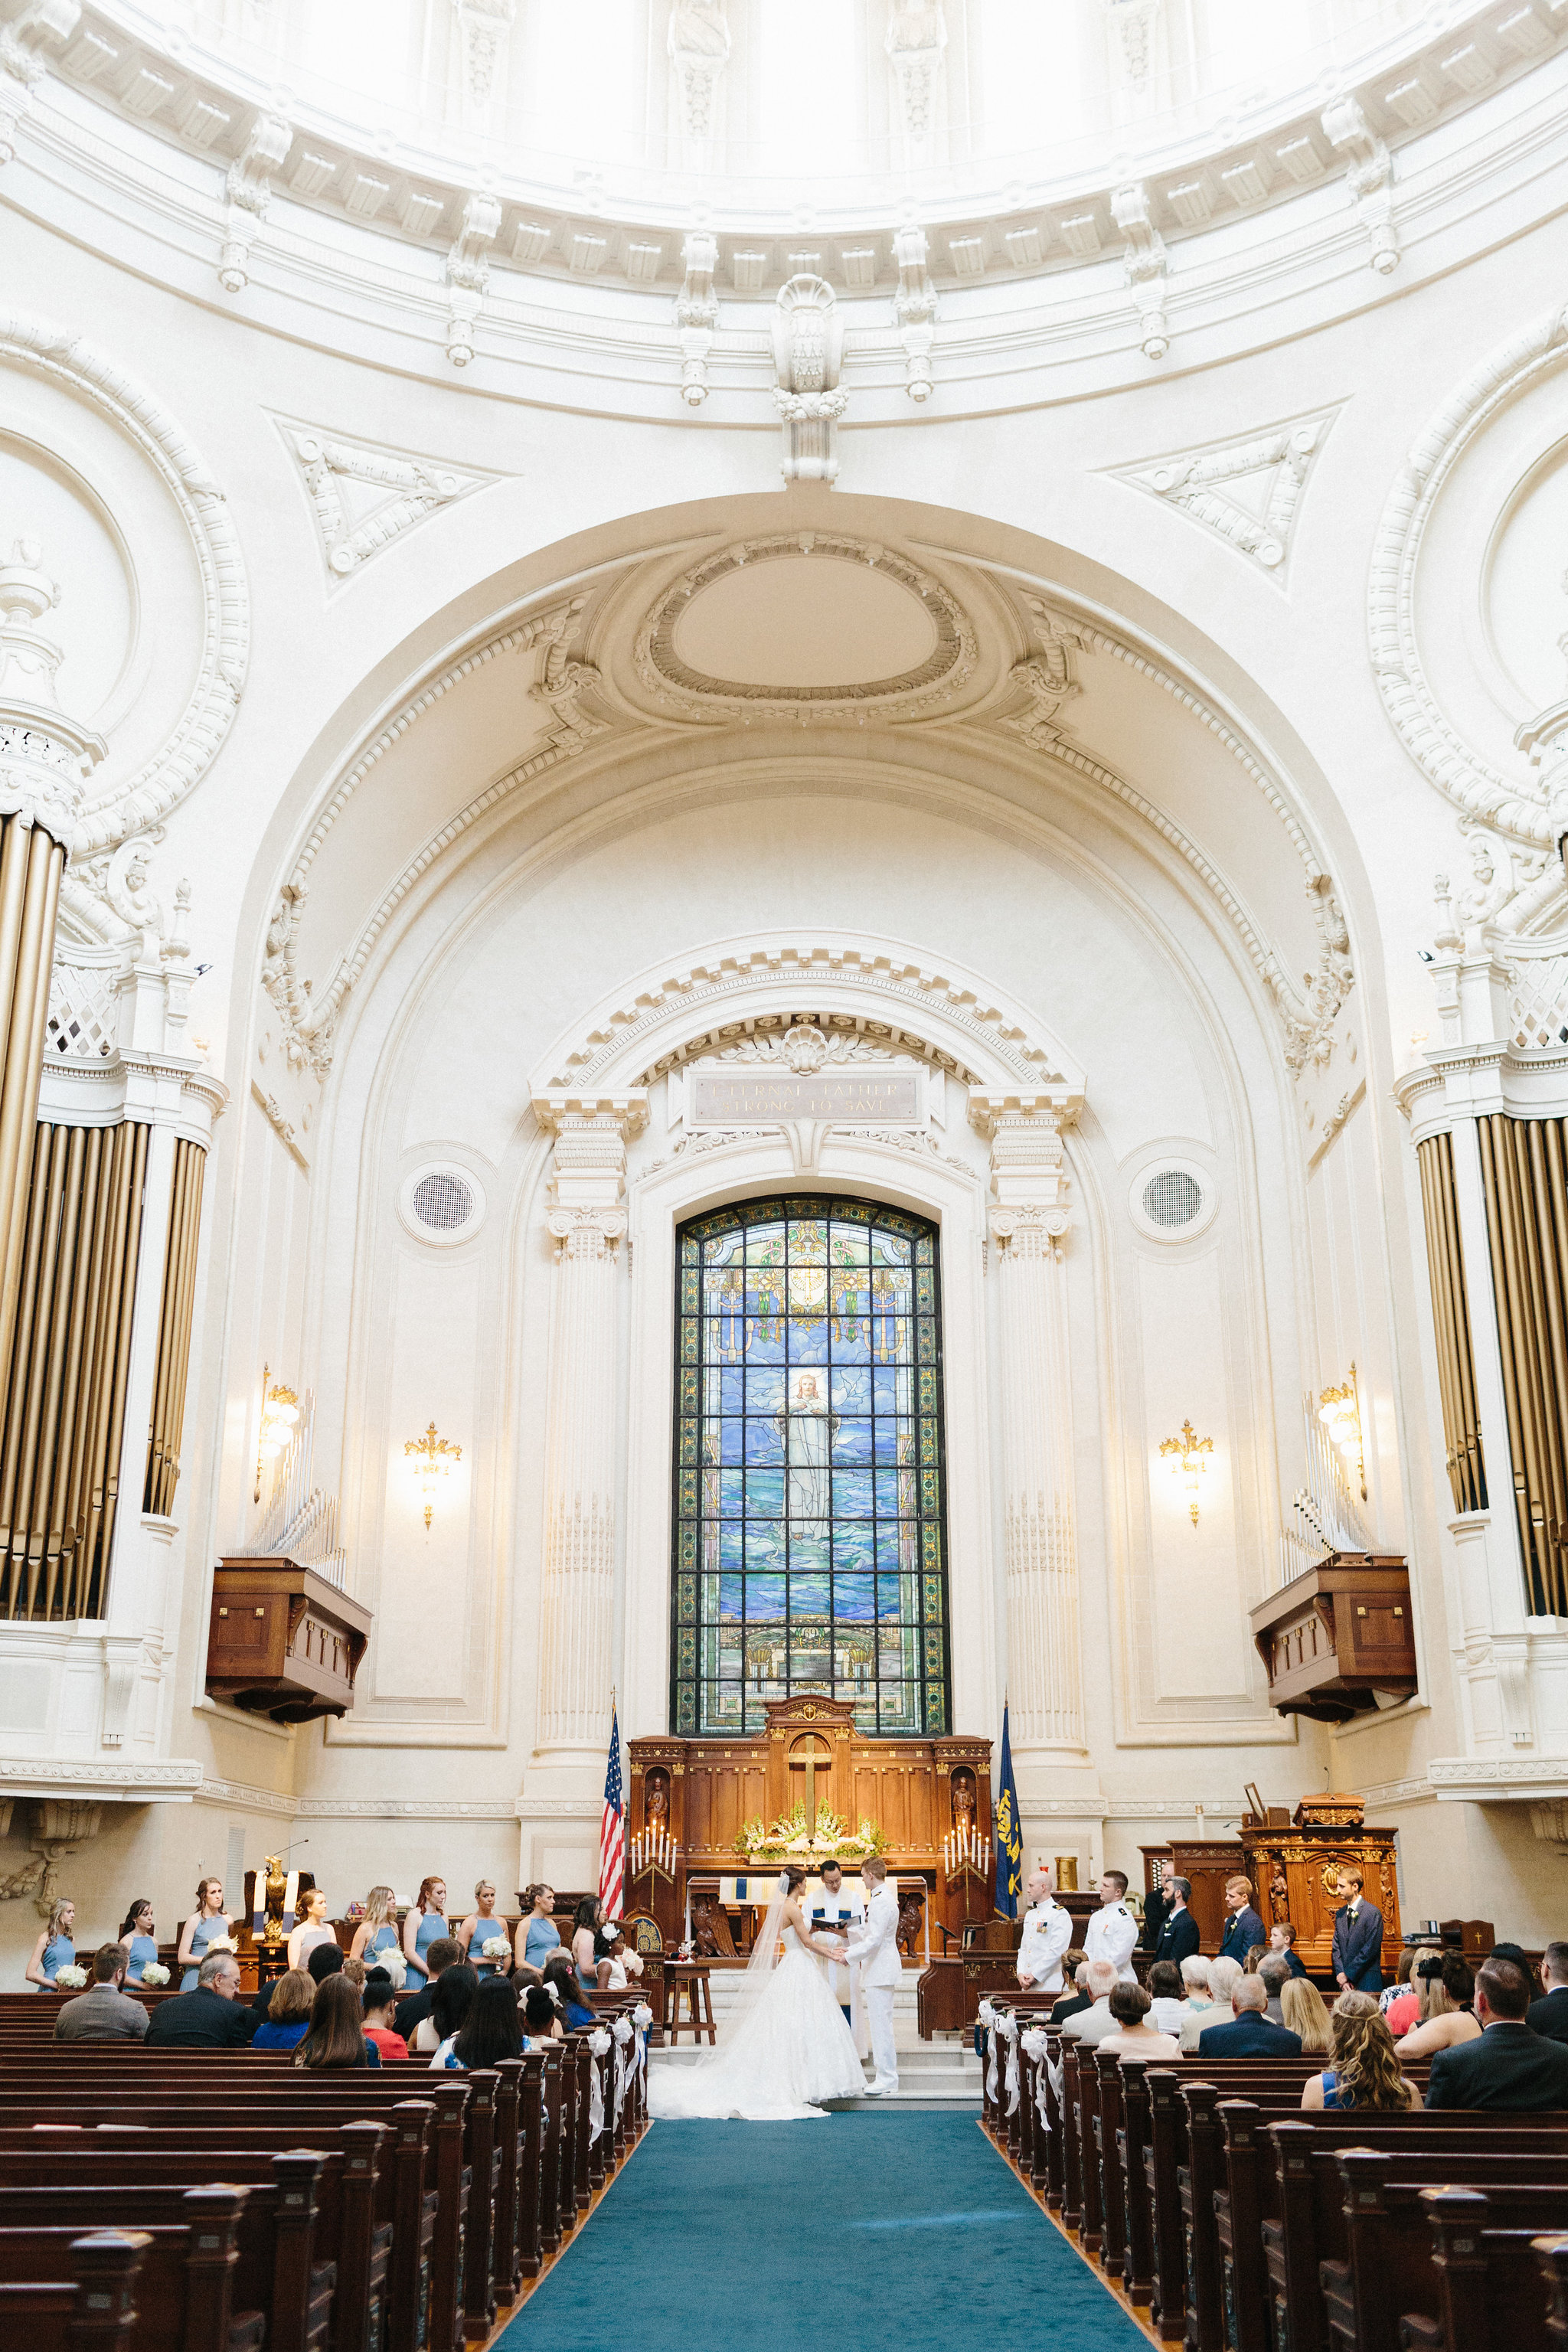 A bride and groom at the US Naval Academy Chapel altar.